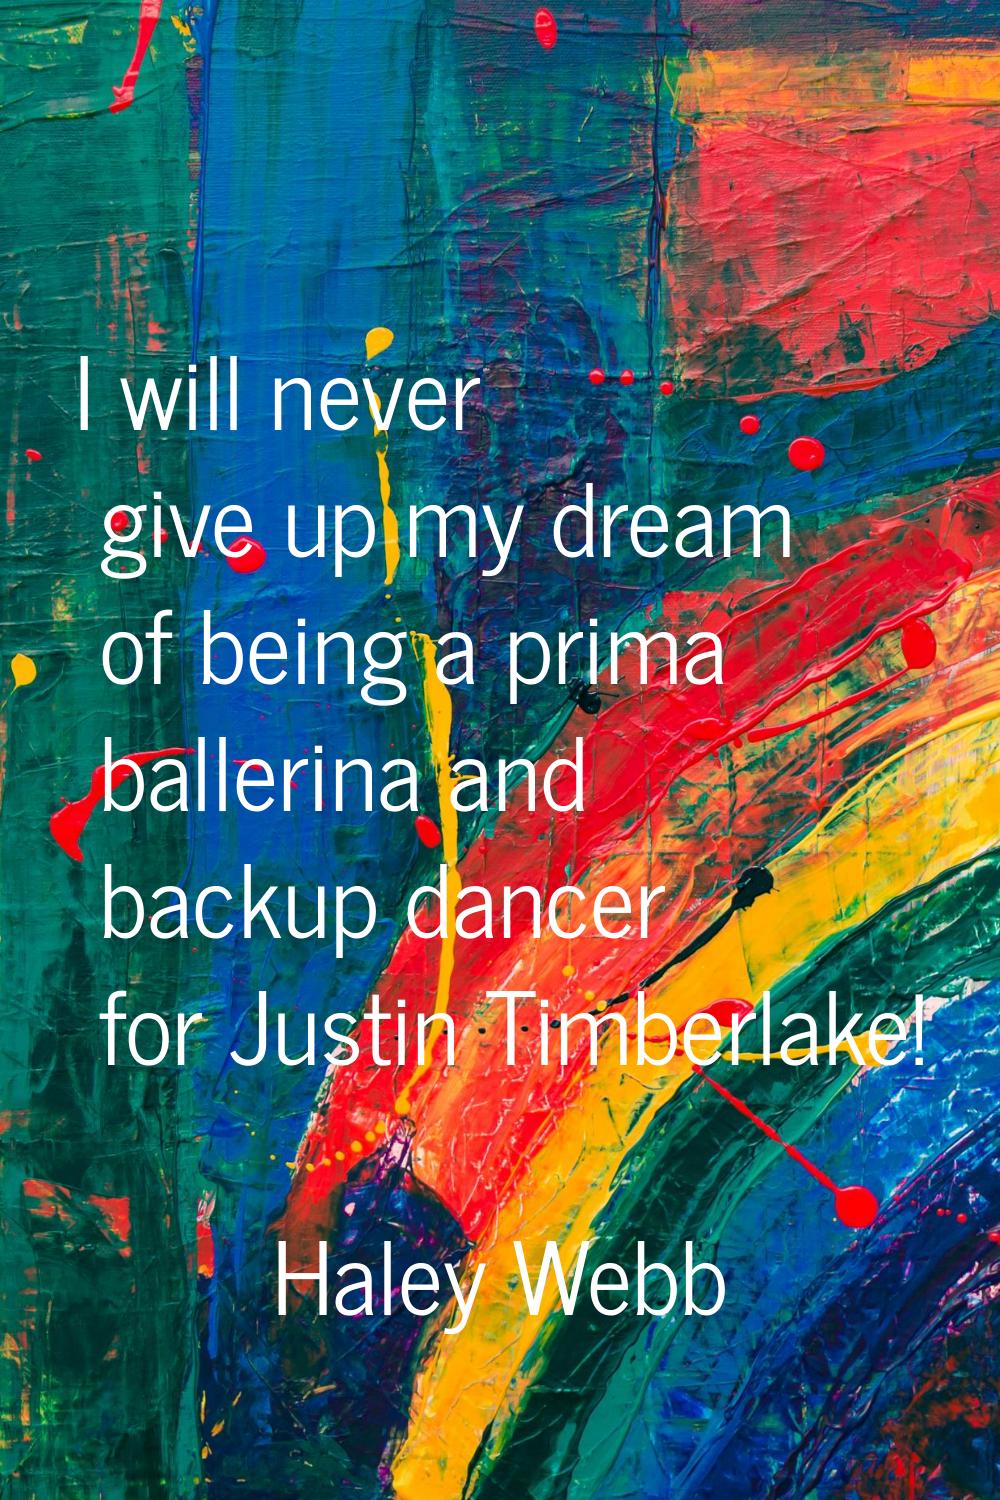 I will never give up my dream of being a prima ballerina and backup dancer for Justin Timberlake!